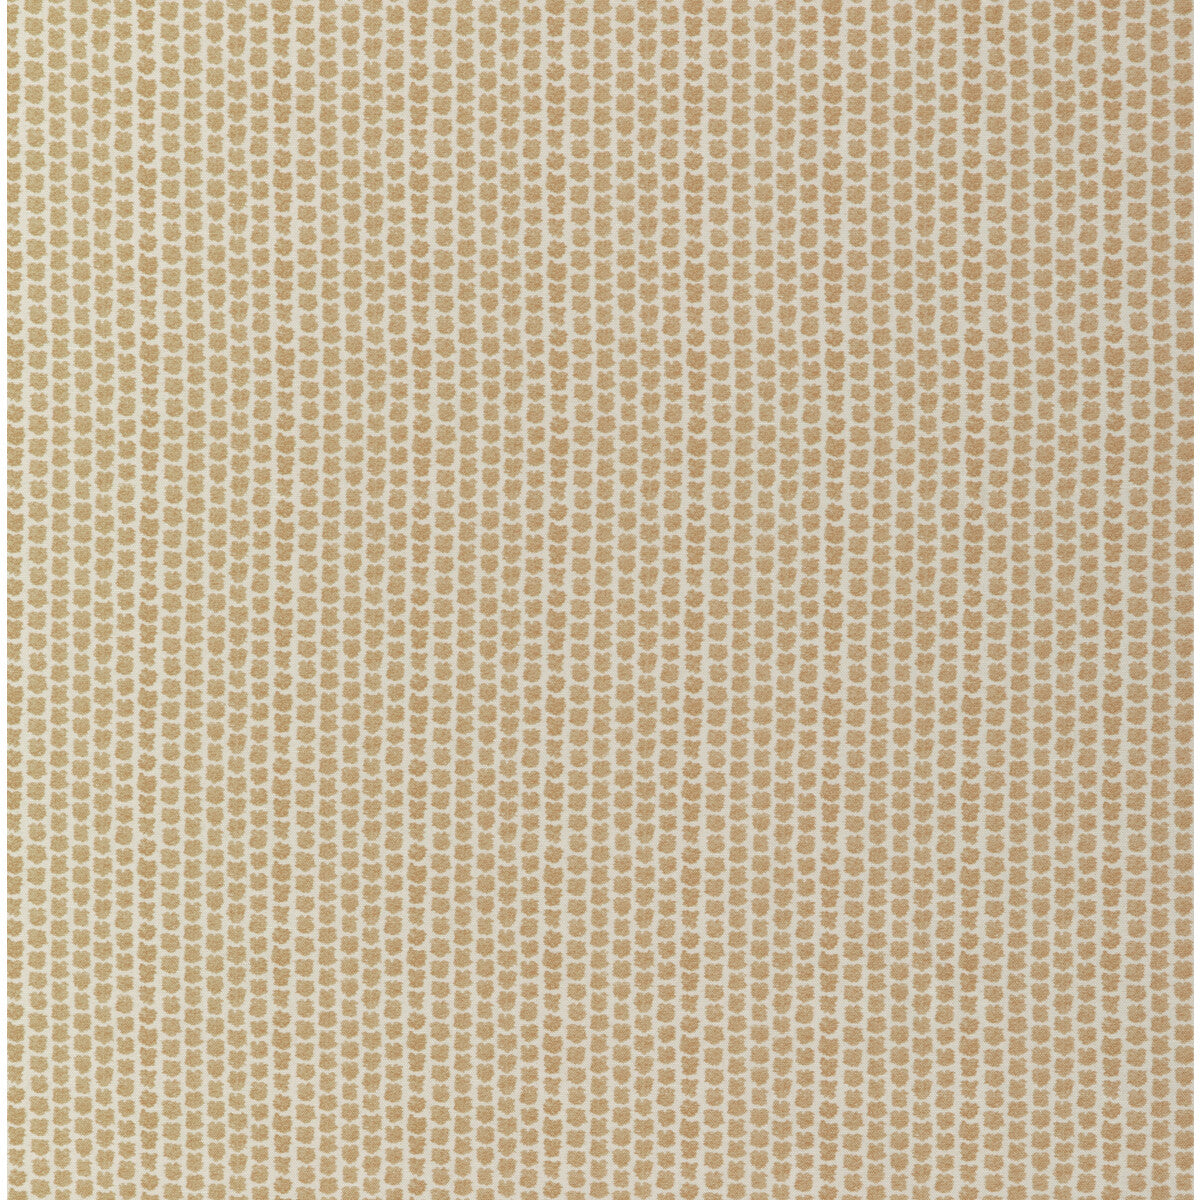 Kaya II fabric in wheat color - pattern 2017224.116.0 - by Lee Jofa in the Clare Prints collection